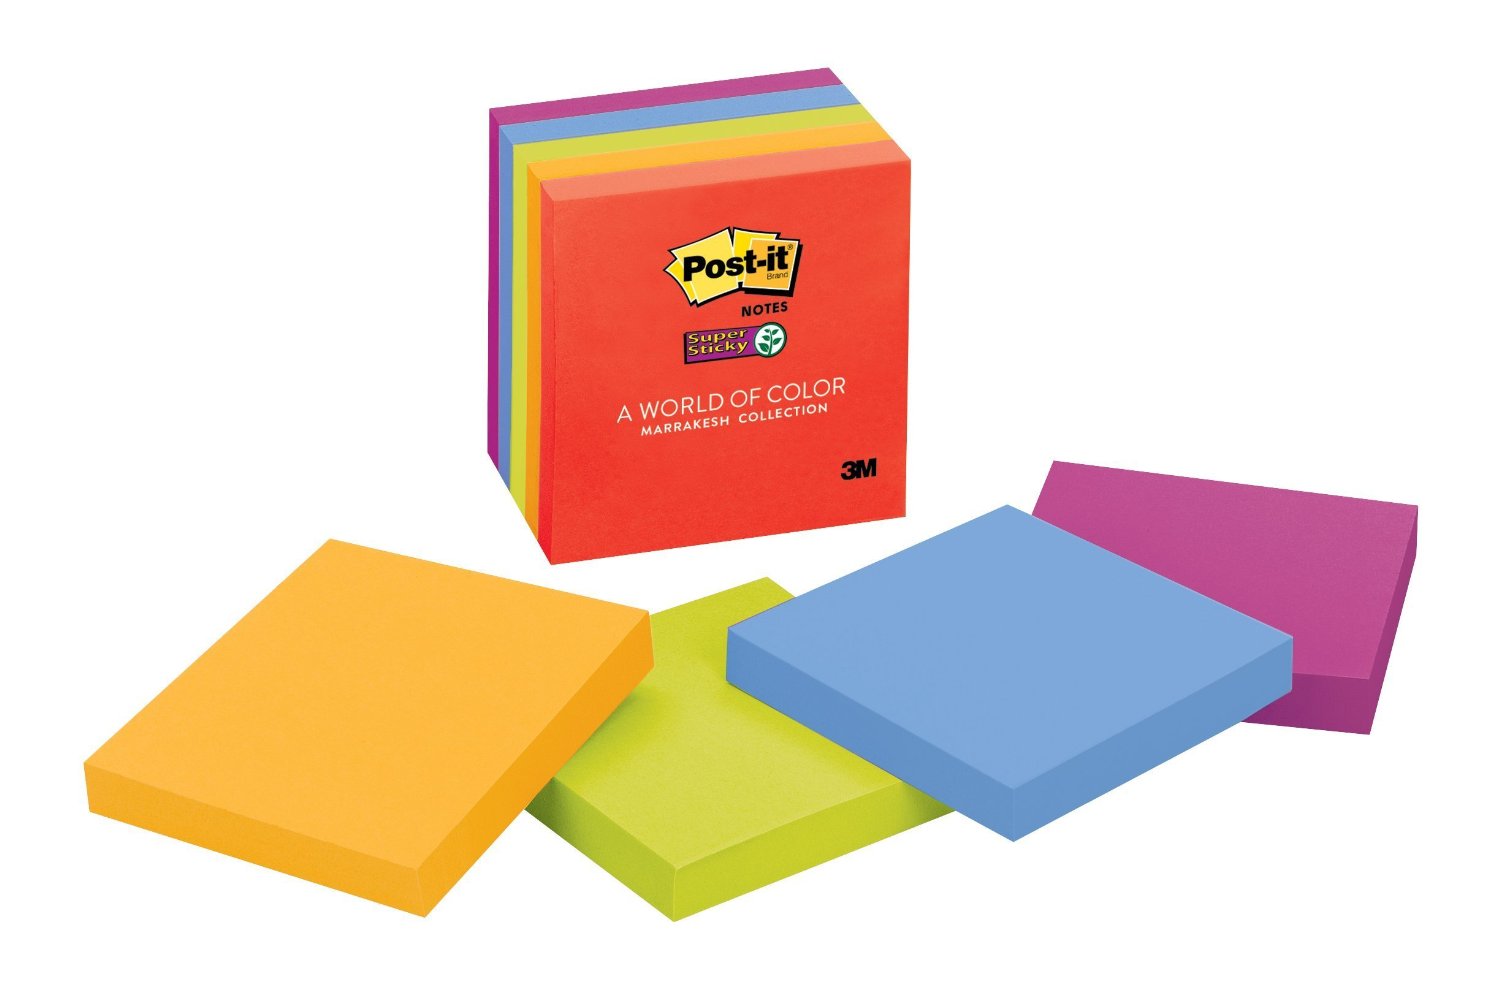 Amazon.com : Post-it Super Sticky Notes, 3 in x 3 in, Marrakesh ...